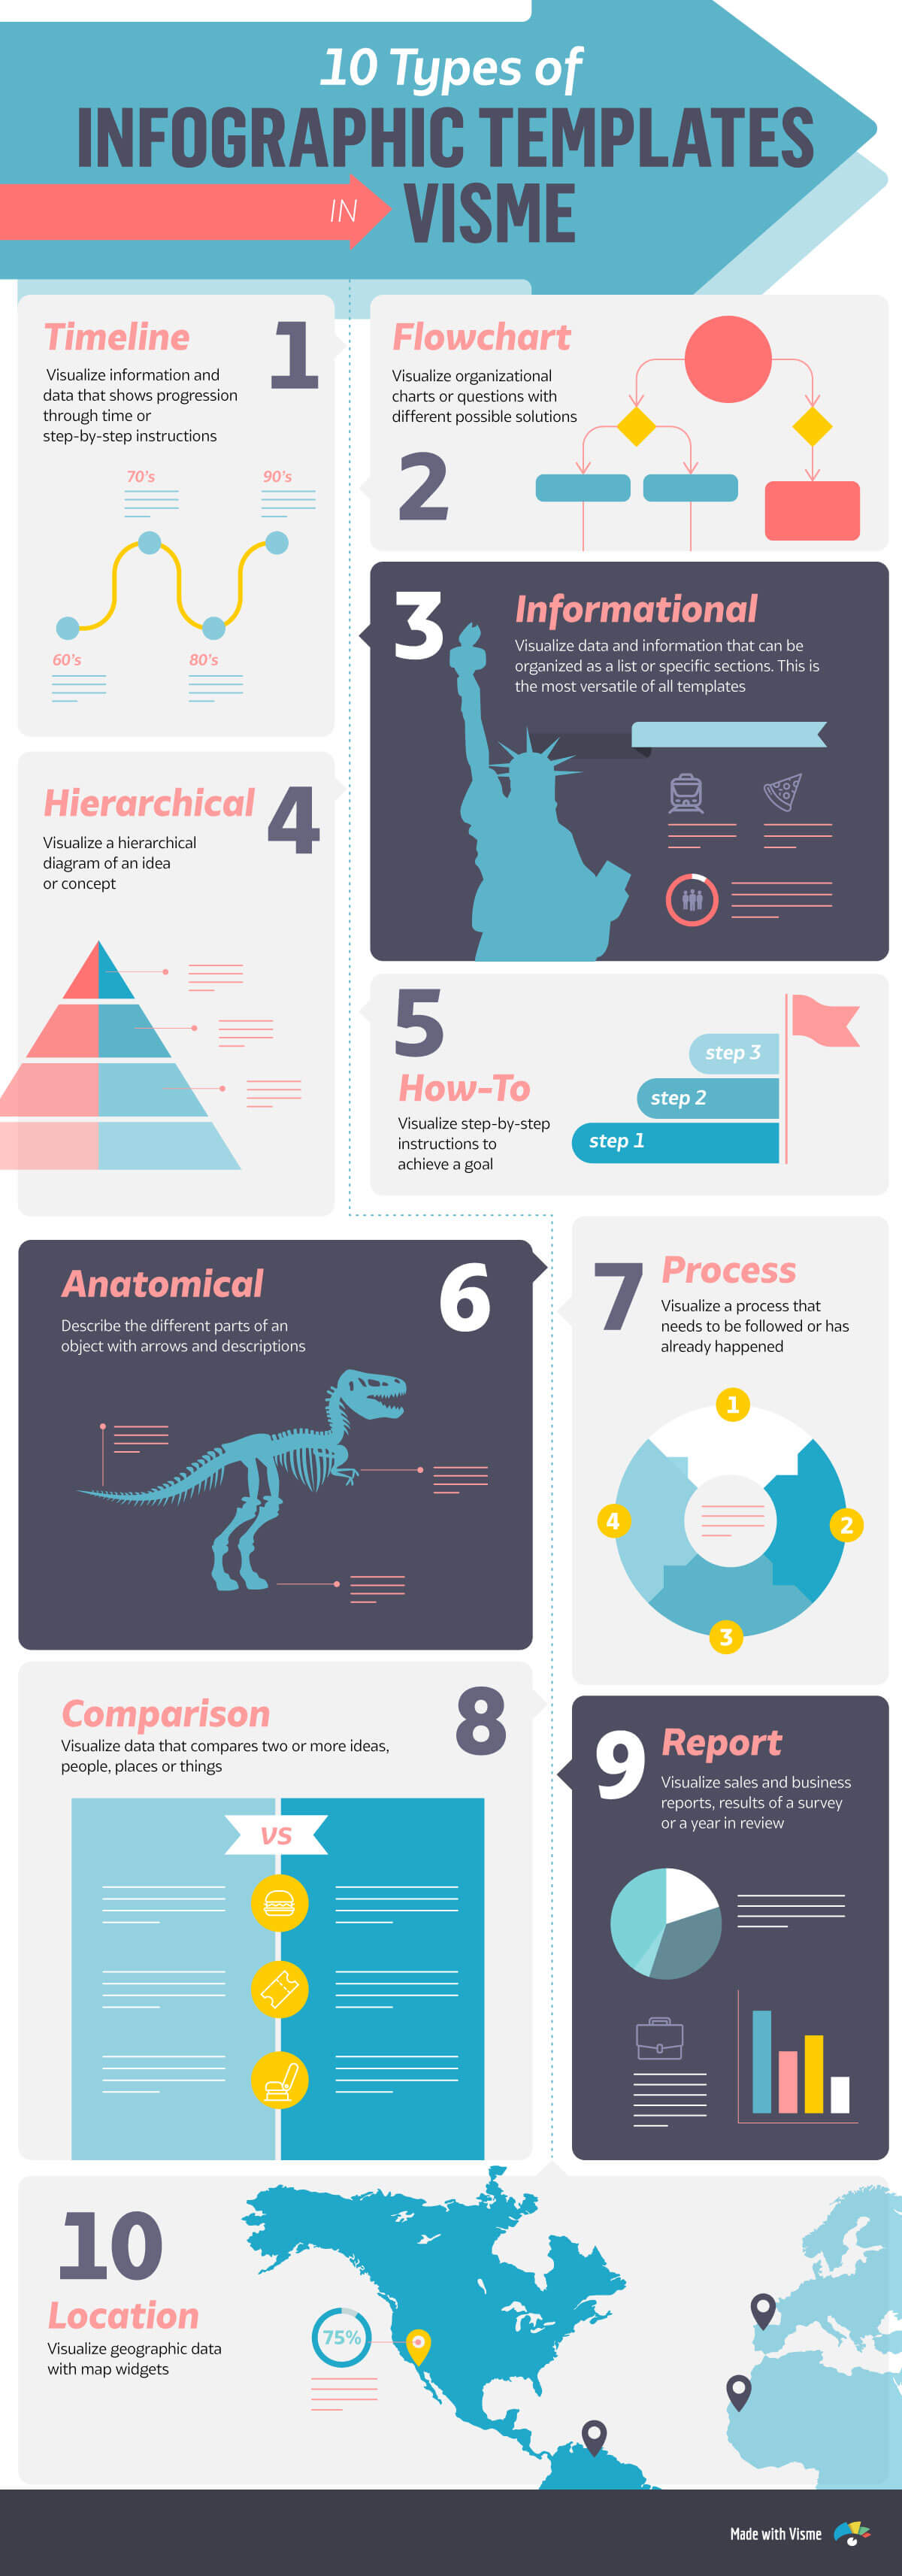 An infographic of the 10 types of infographic templates in Visme